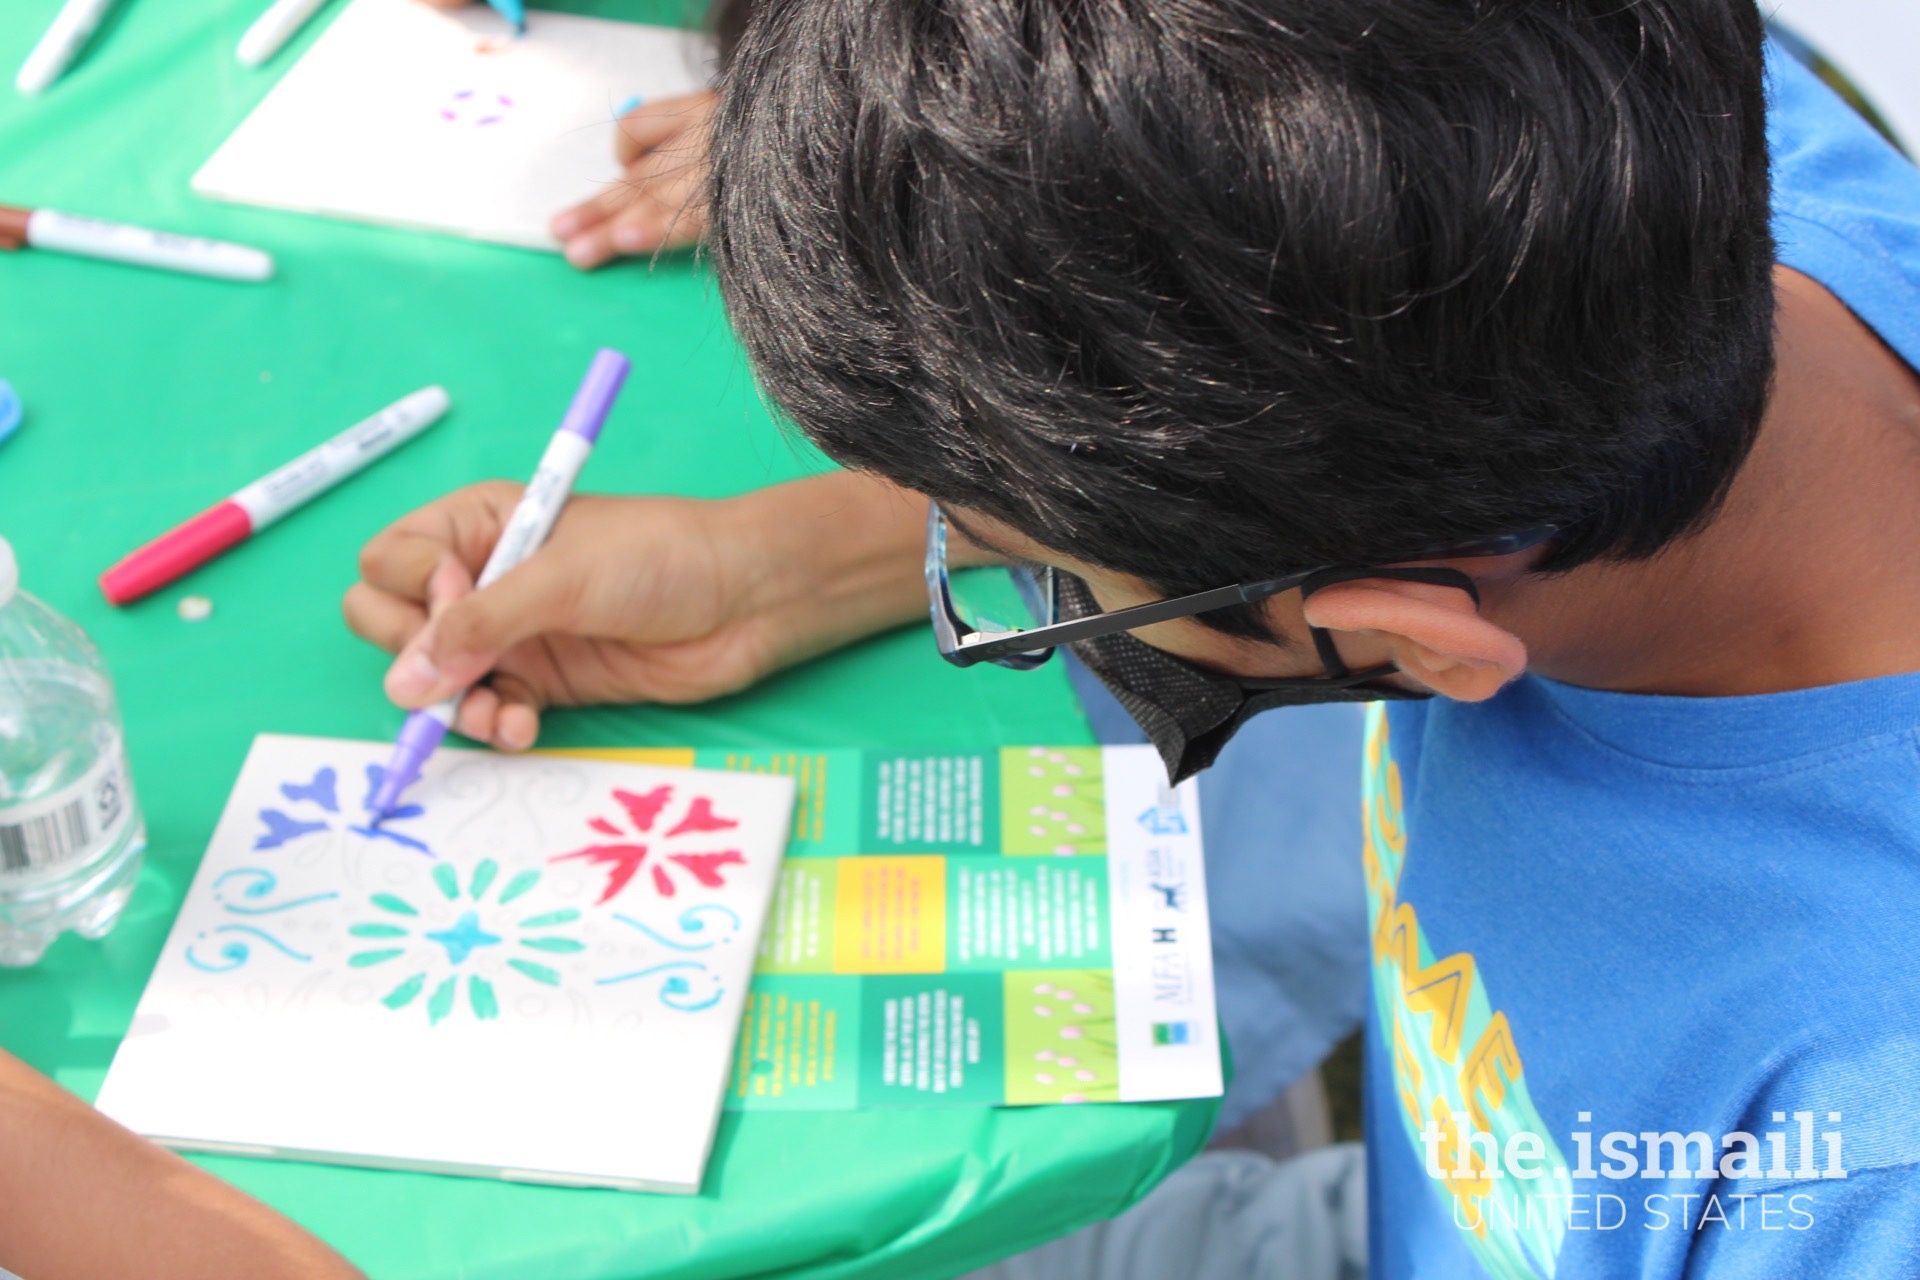 Tile-designing activity using a traditional Persian stencil at the New Year’s Gems arts and crafts booth.